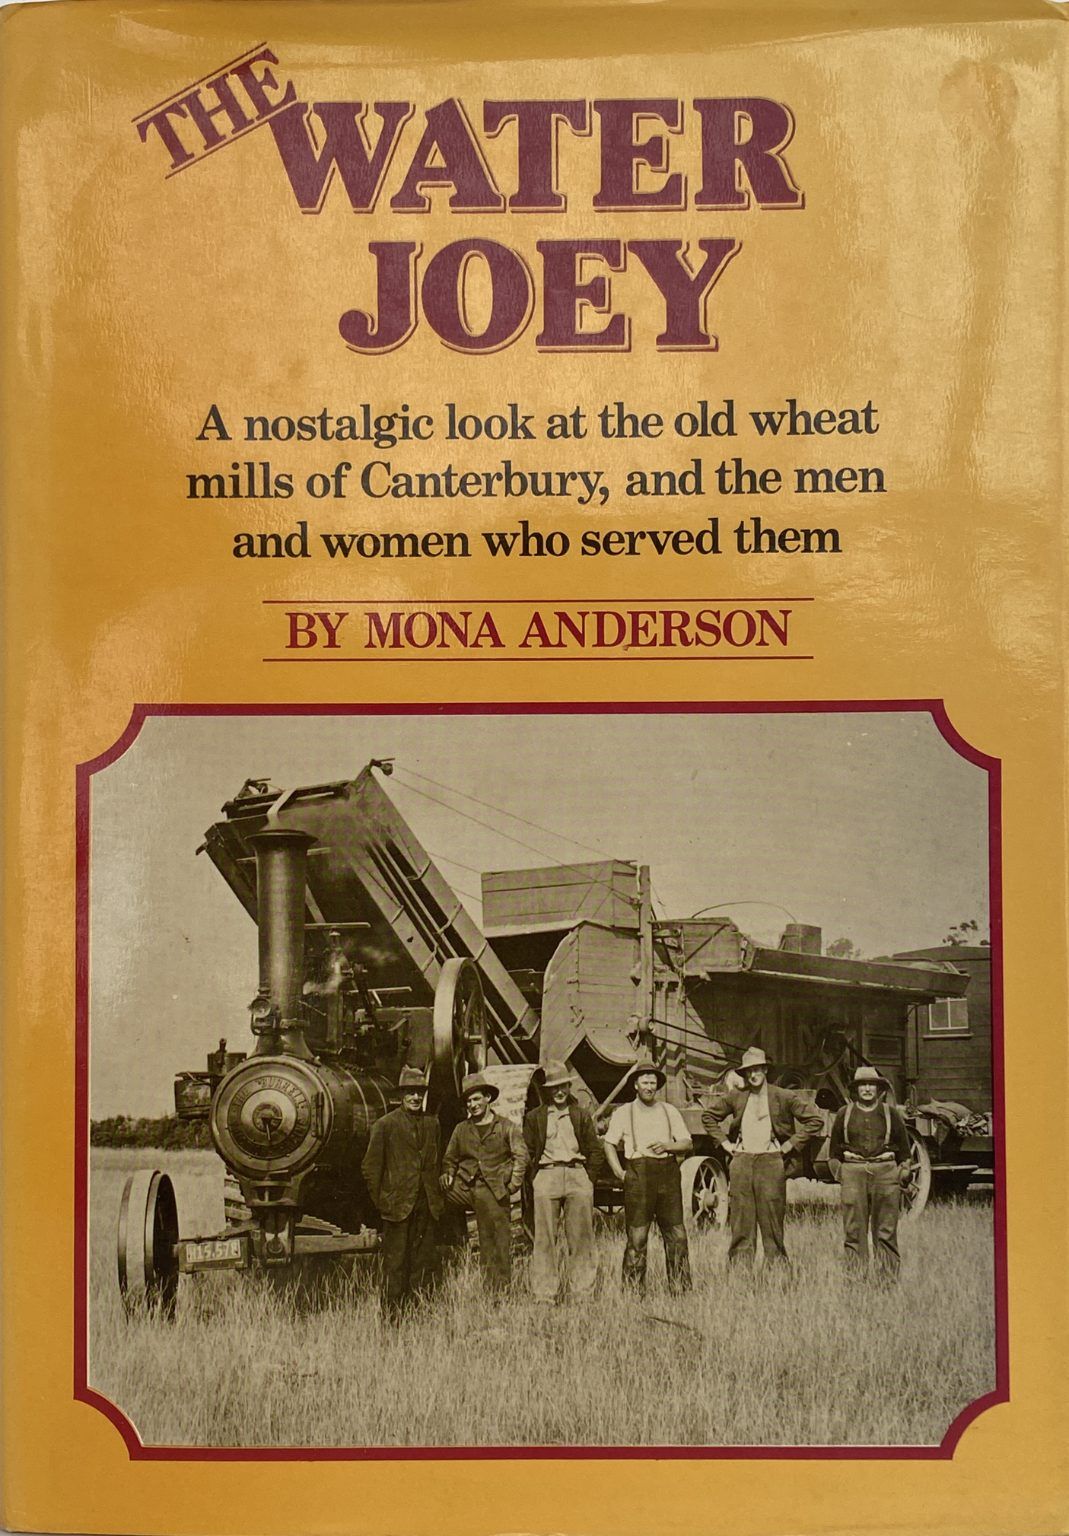 THE WATER JOEY: Old Wheat Mills Of Canterbury